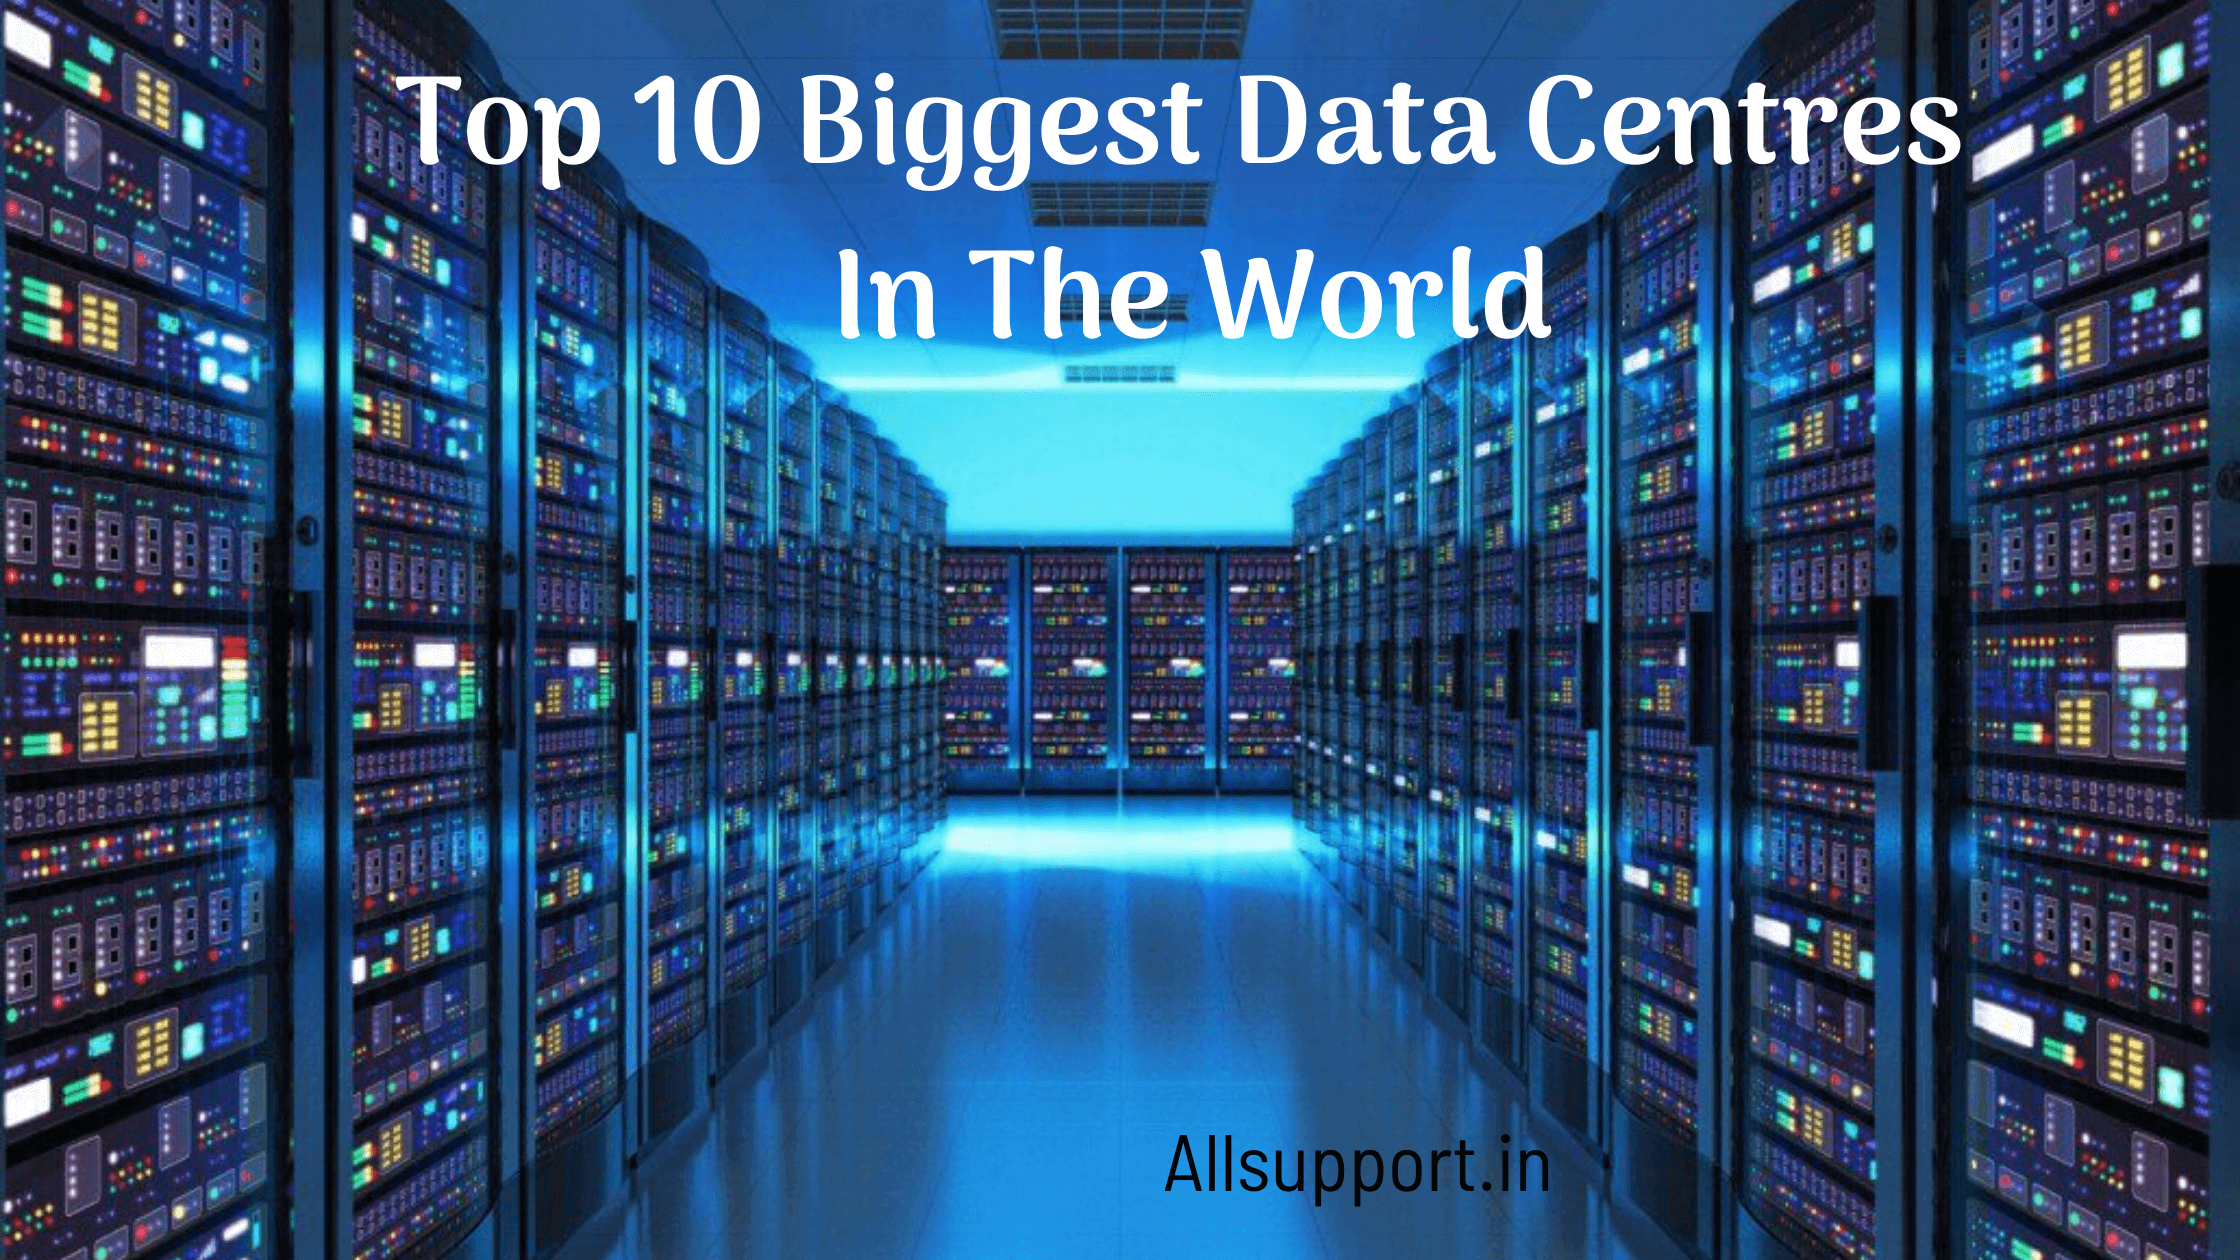 Top 10 Biggest Data Centres In The World (1) (1)